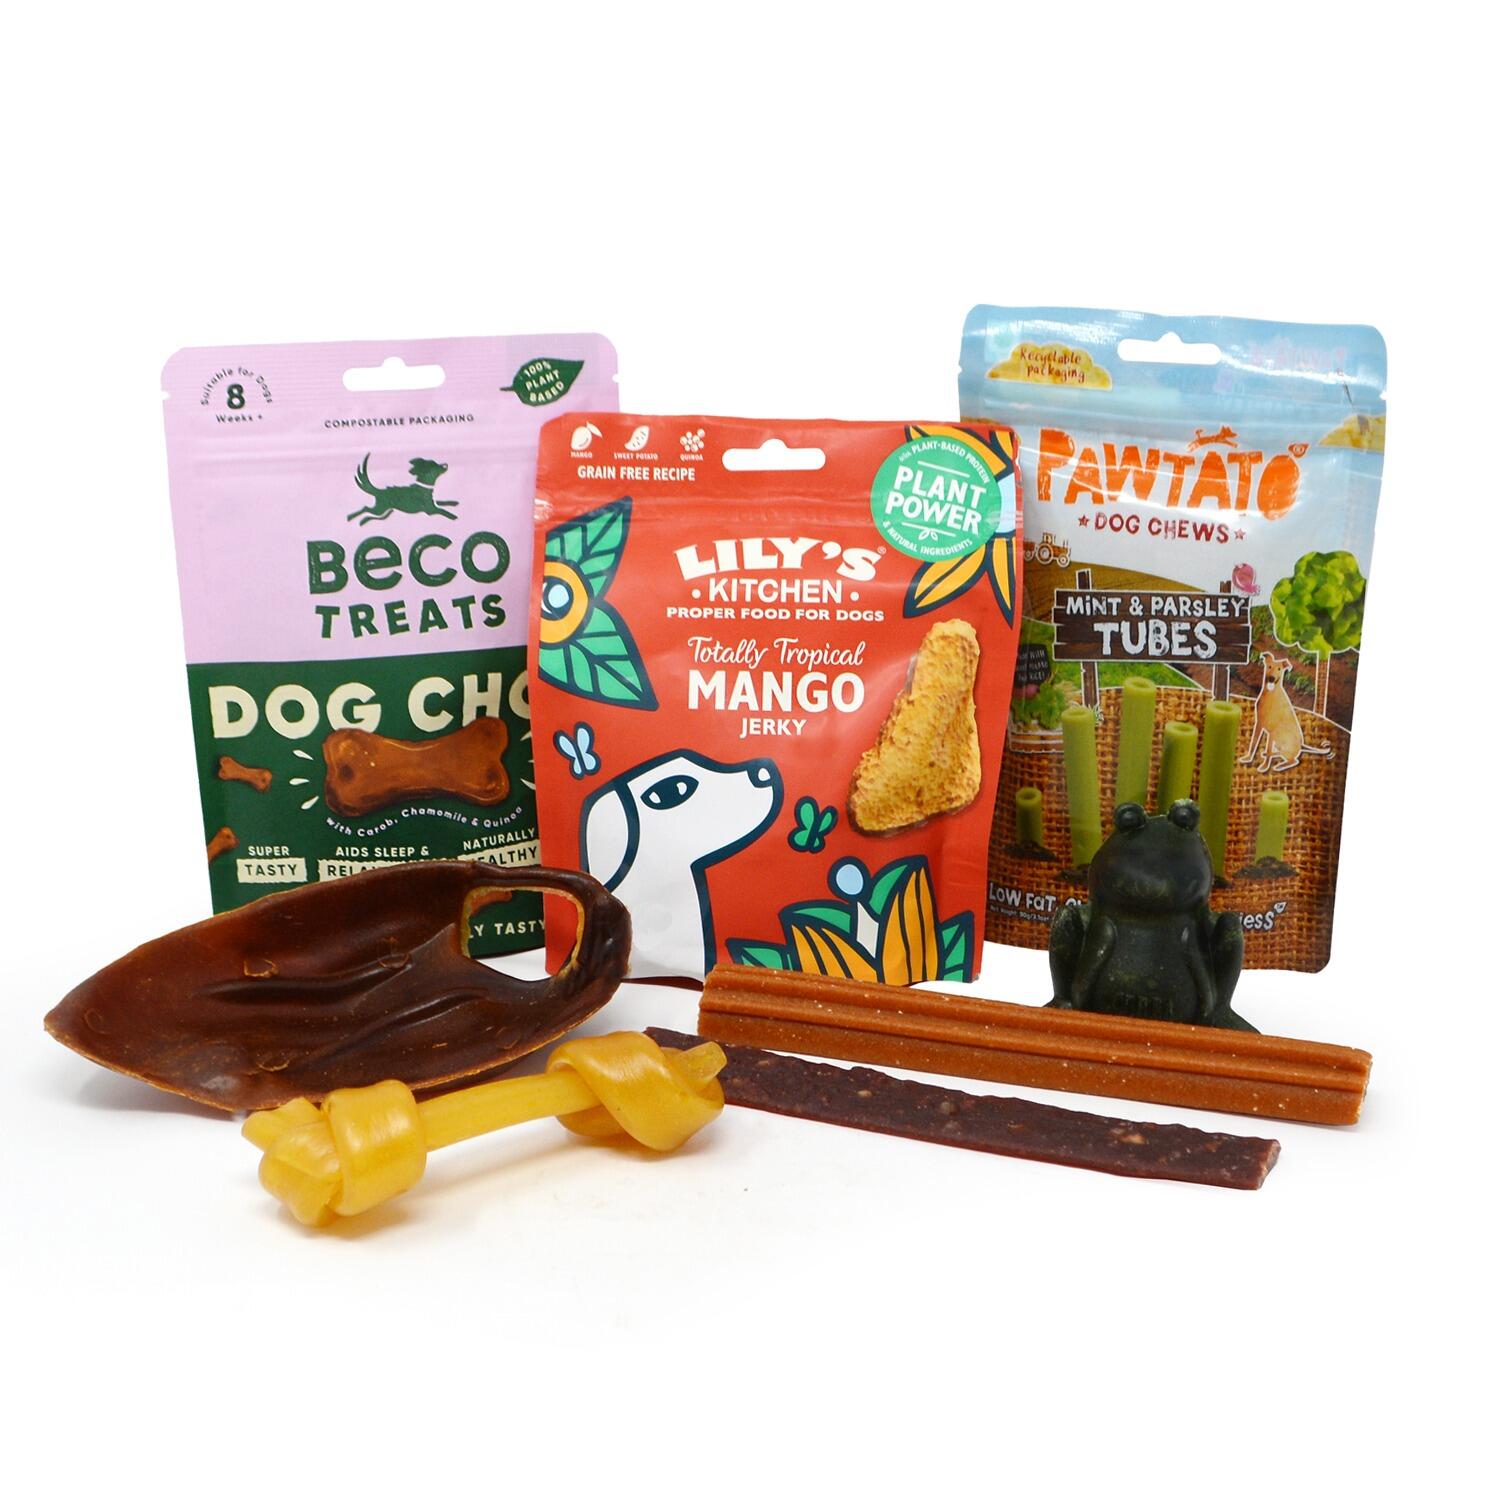 A range of plant-based dog chews and treats for xmas